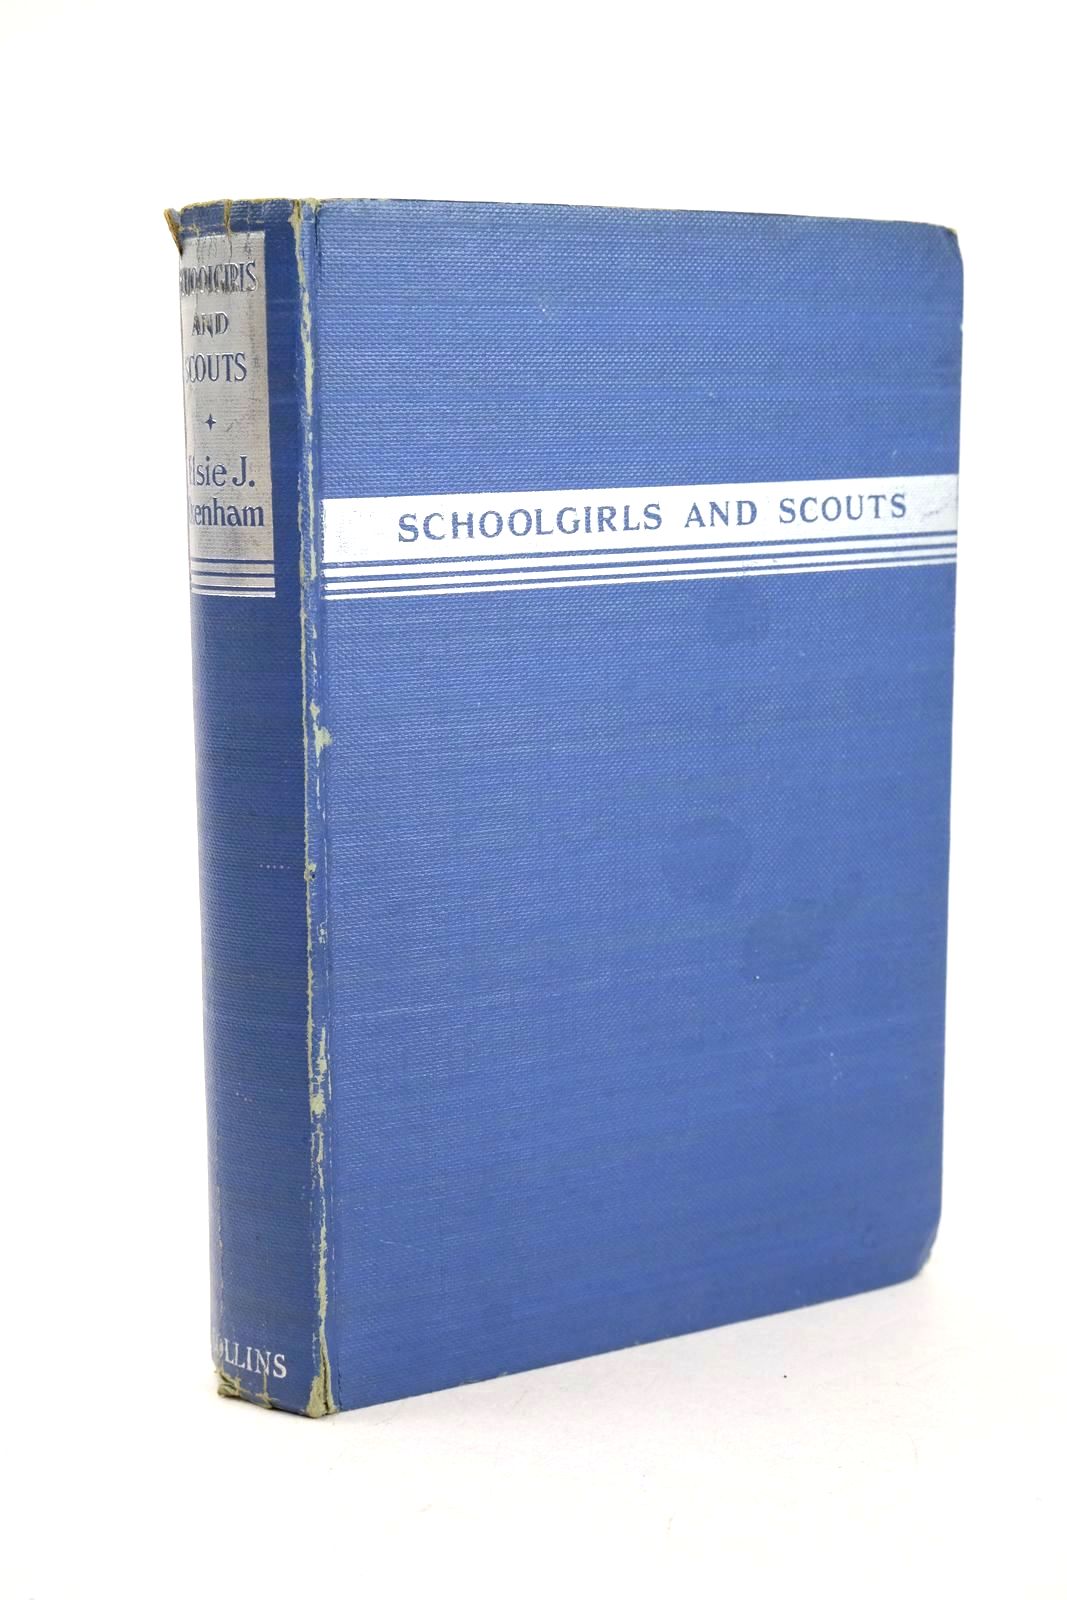 Photo of SCHOOLGIRLS AND SCOUTS written by Oxenham, Elsie J. published by Collins Clear-Type Press (STOCK CODE: 1327045)  for sale by Stella & Rose's Books